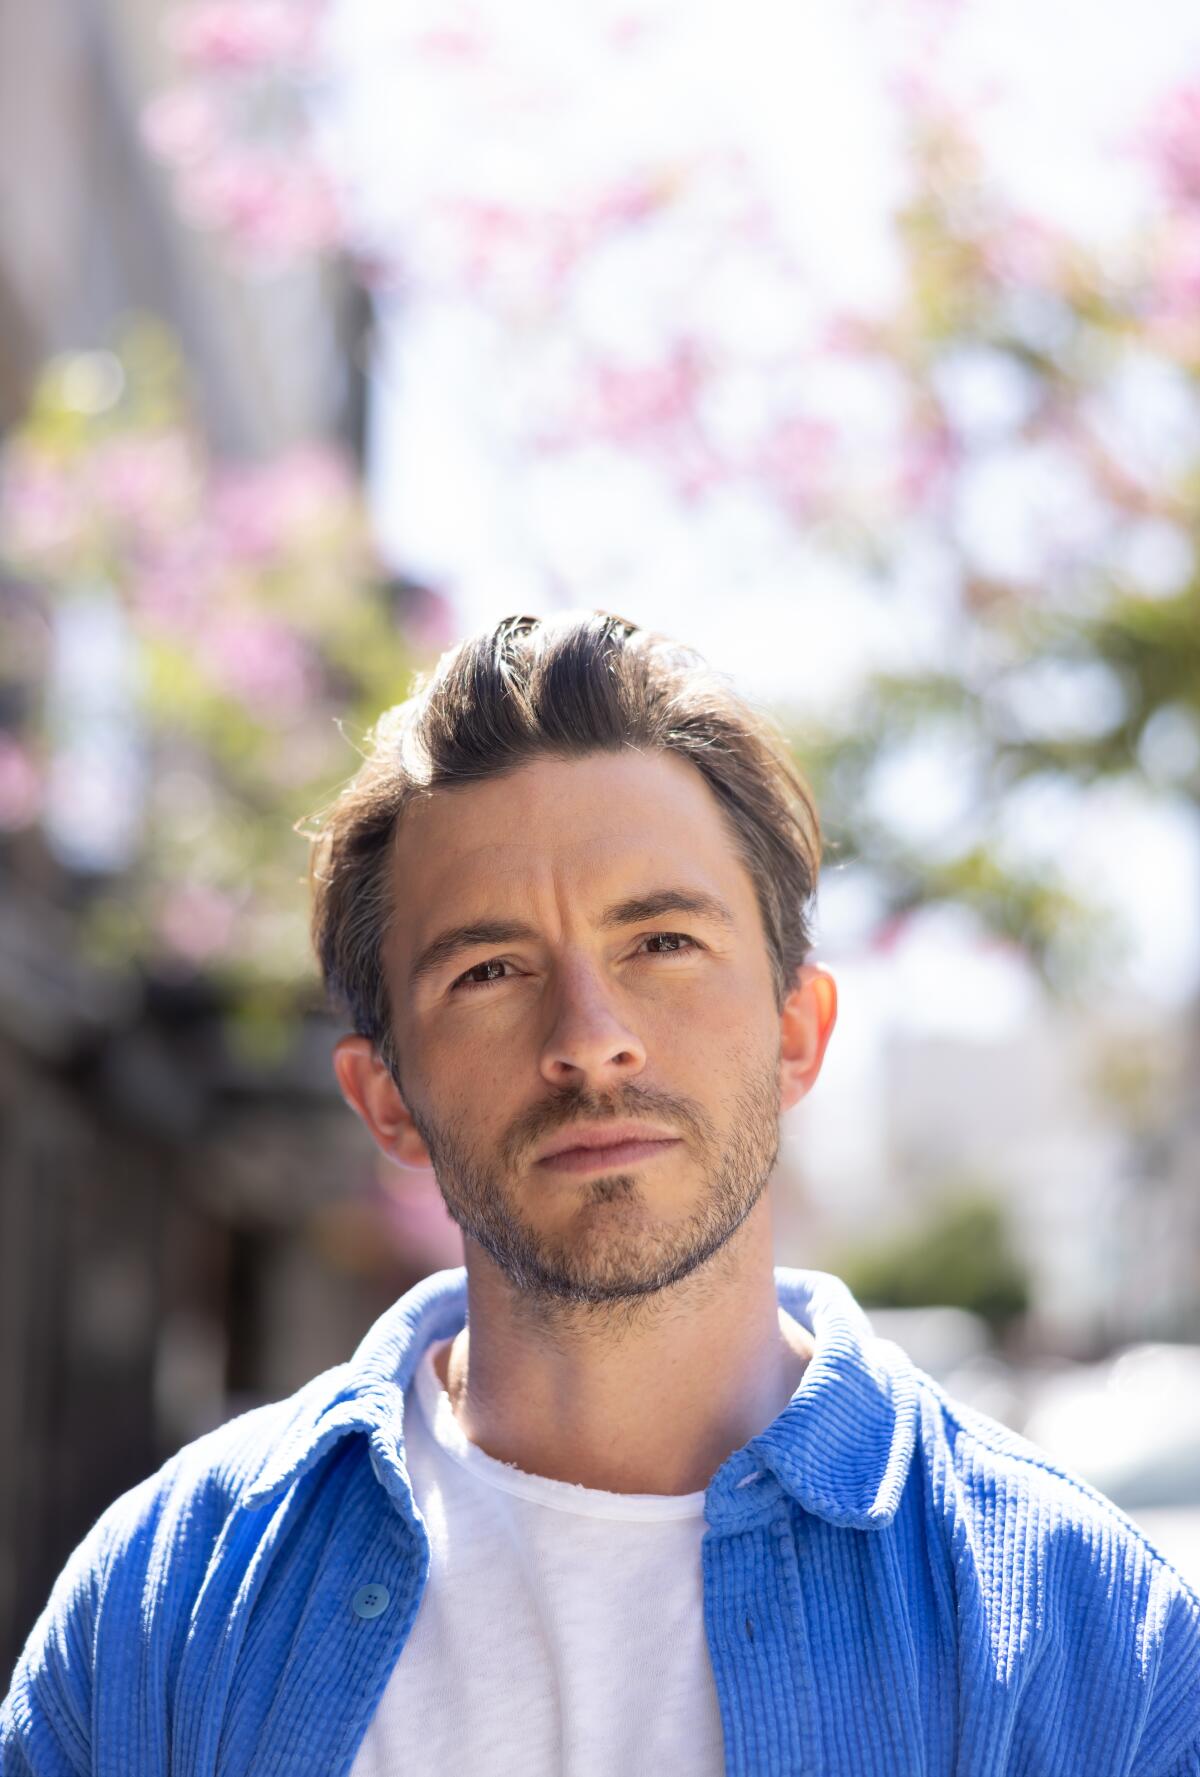 The actor Jonathan Bailey in a blue shirt over a white shirt, standing before a flowering tree.